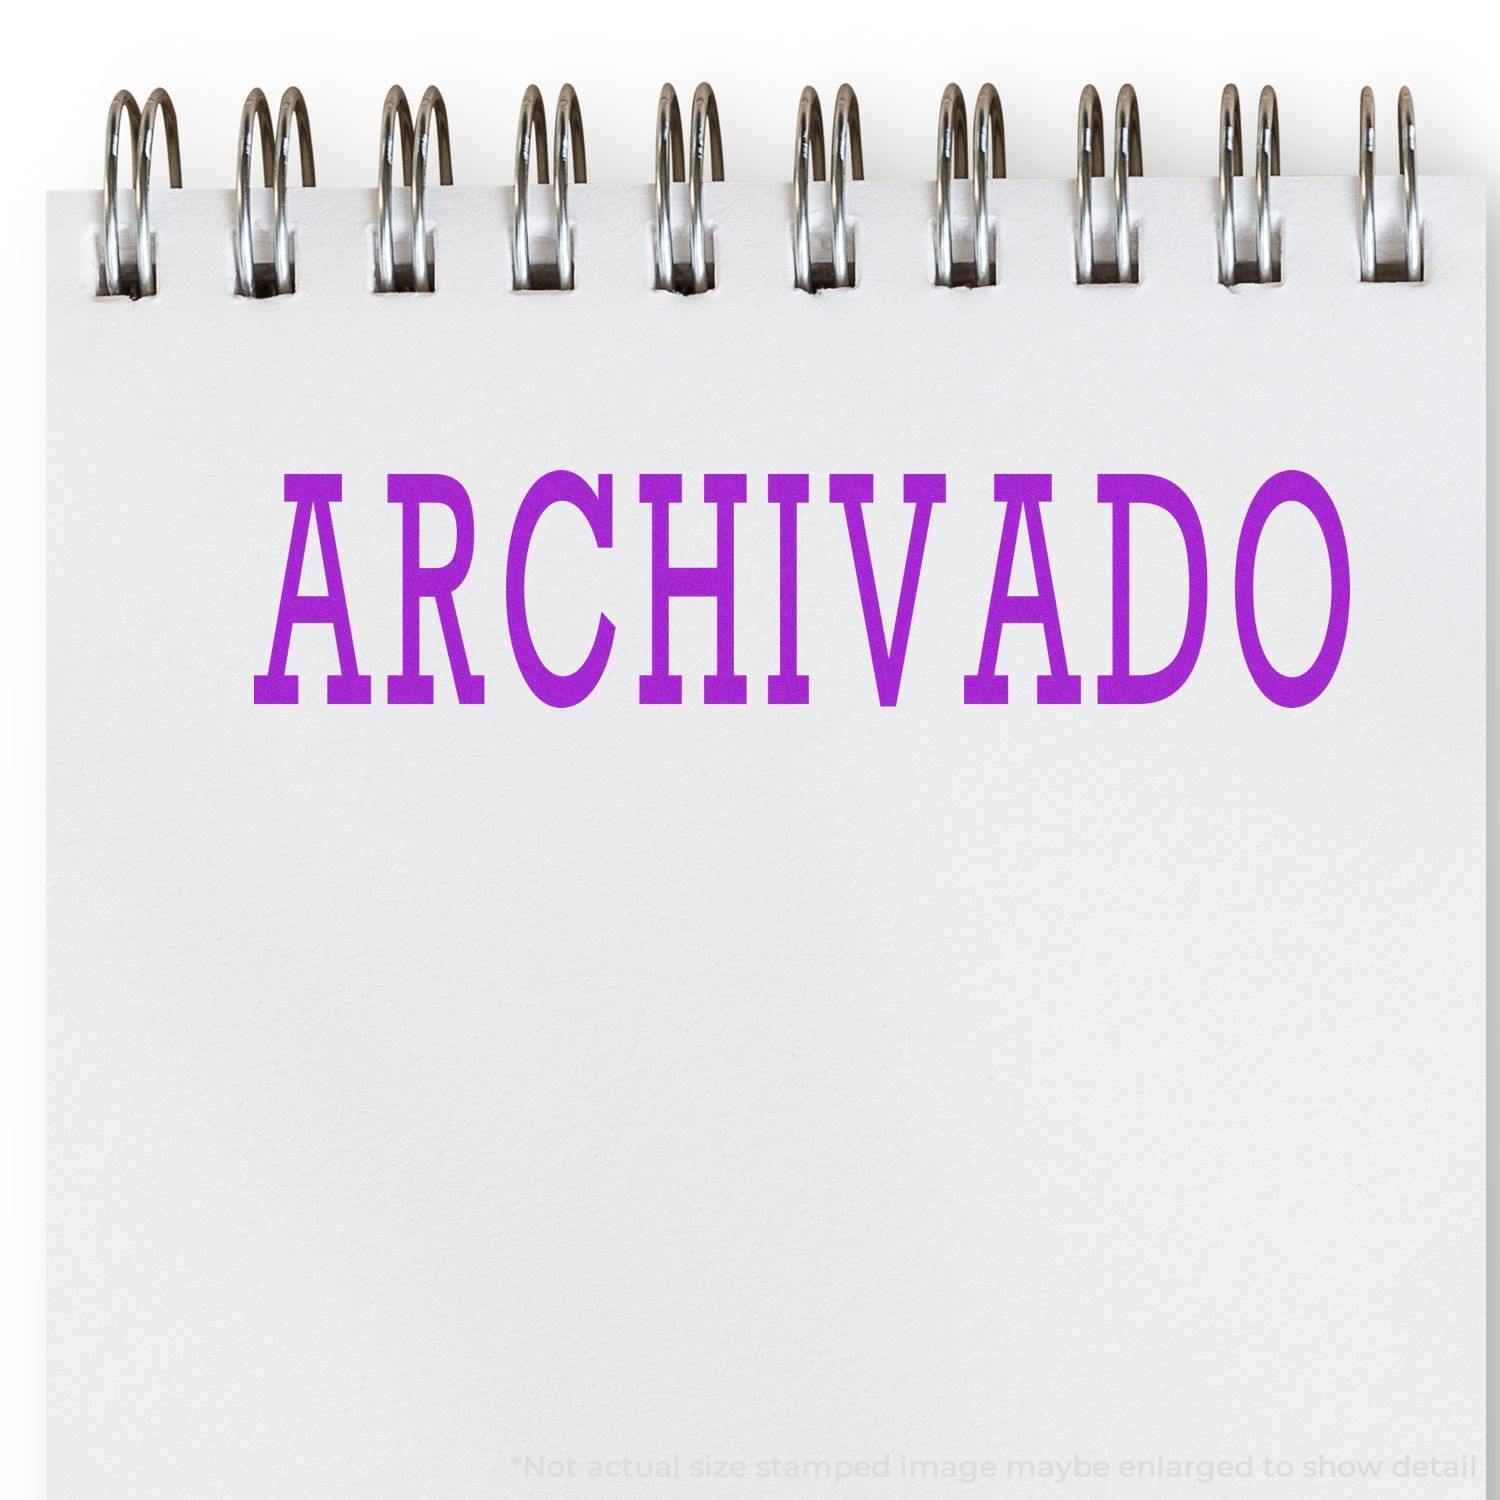 In Use Large Pre-Inked Archivado Stamp Image